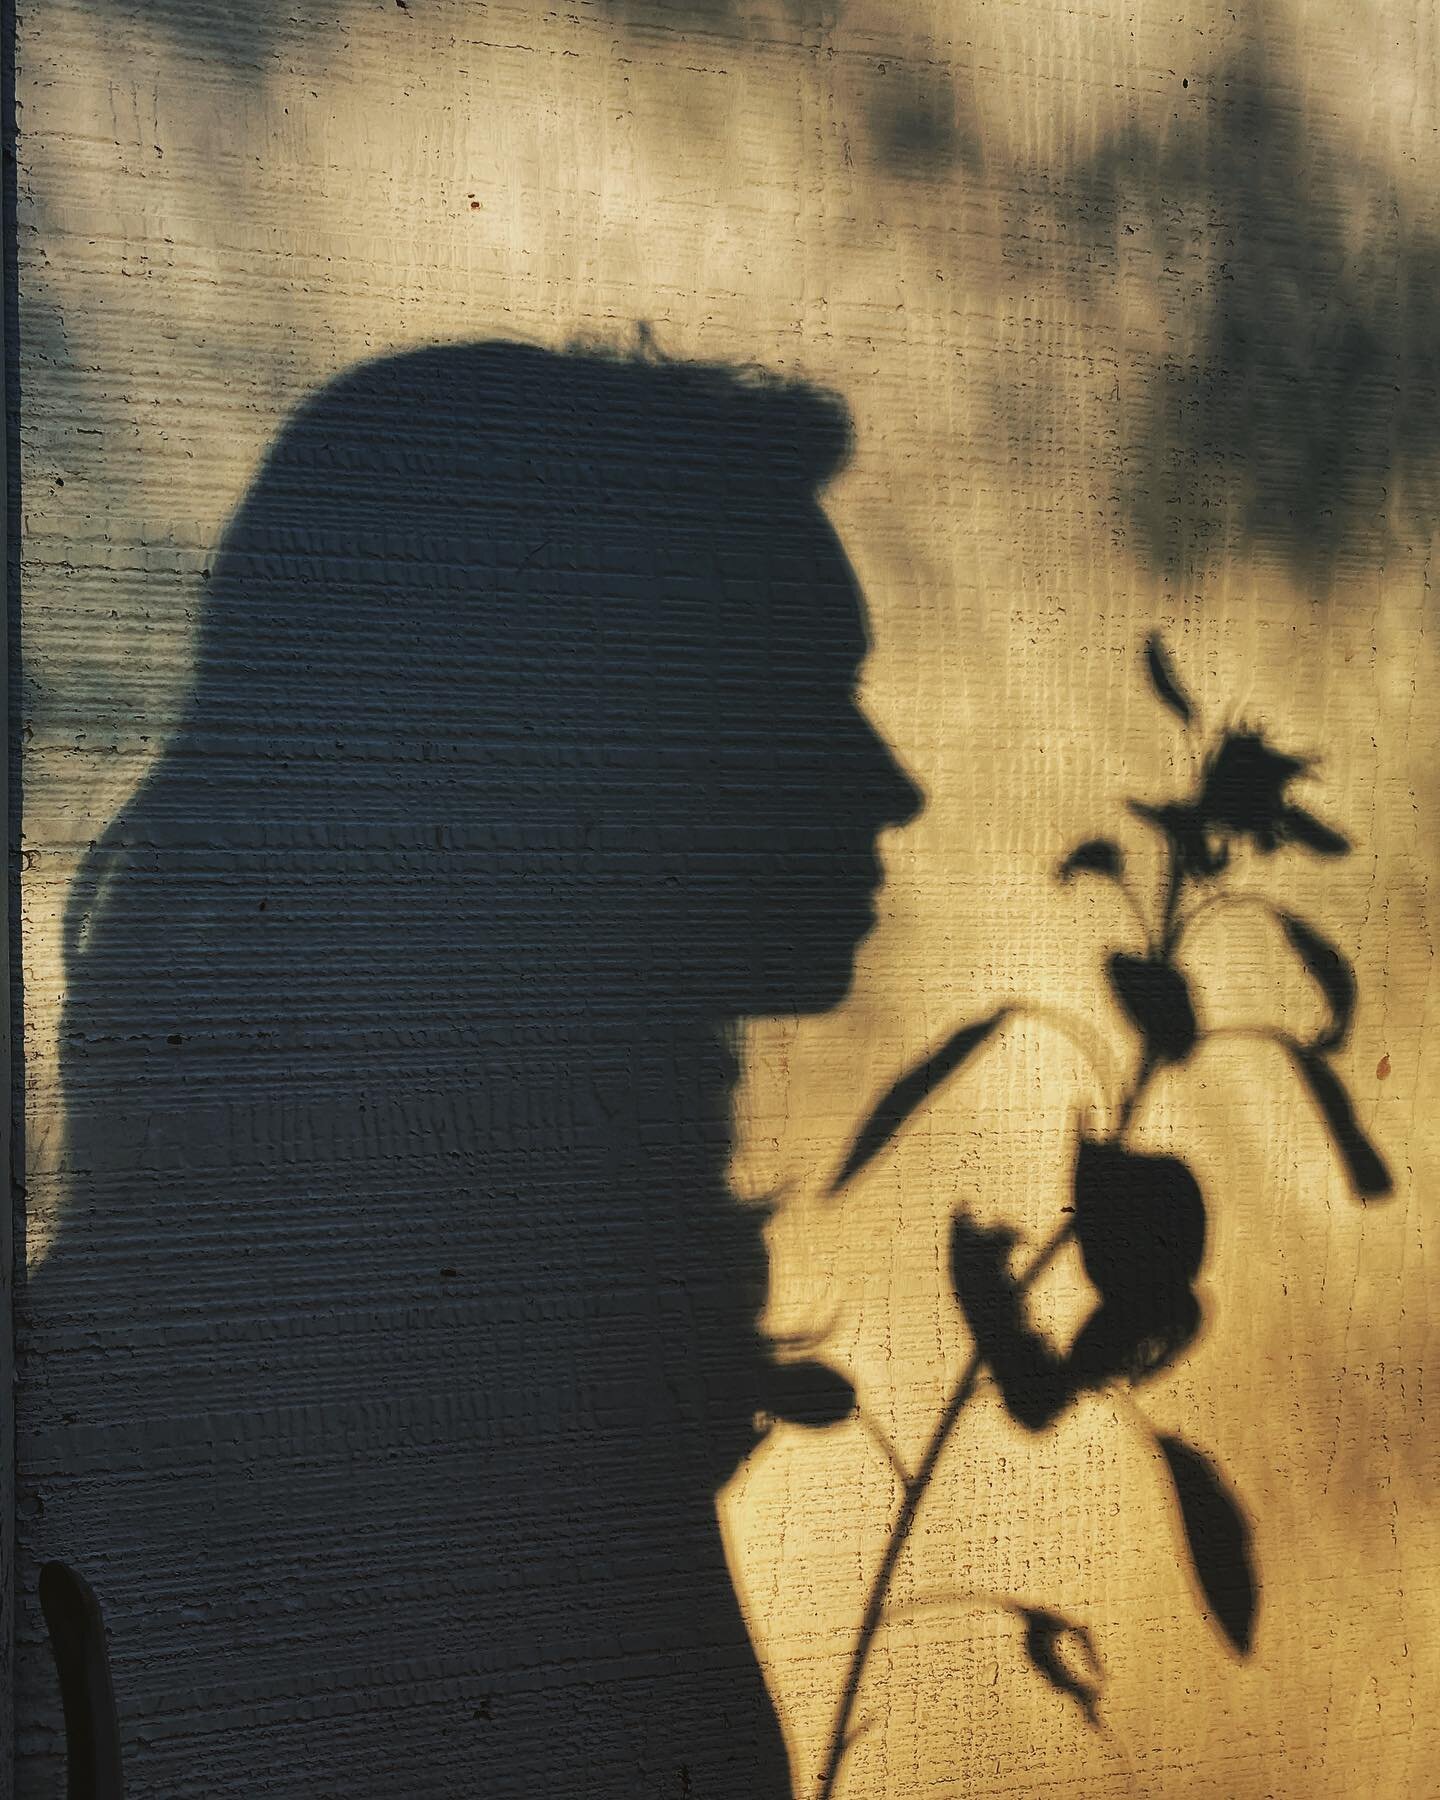 65/100 - a wall with shadowy profiles of a sunflower and a gardener, side by side in the afternoon winter light of christmas eve. #100daysofthingsivenoticed 

#sunflower🌻 #afternoonshadows #brbchasinglight #inthegarden #inthegardentoday #slowdown